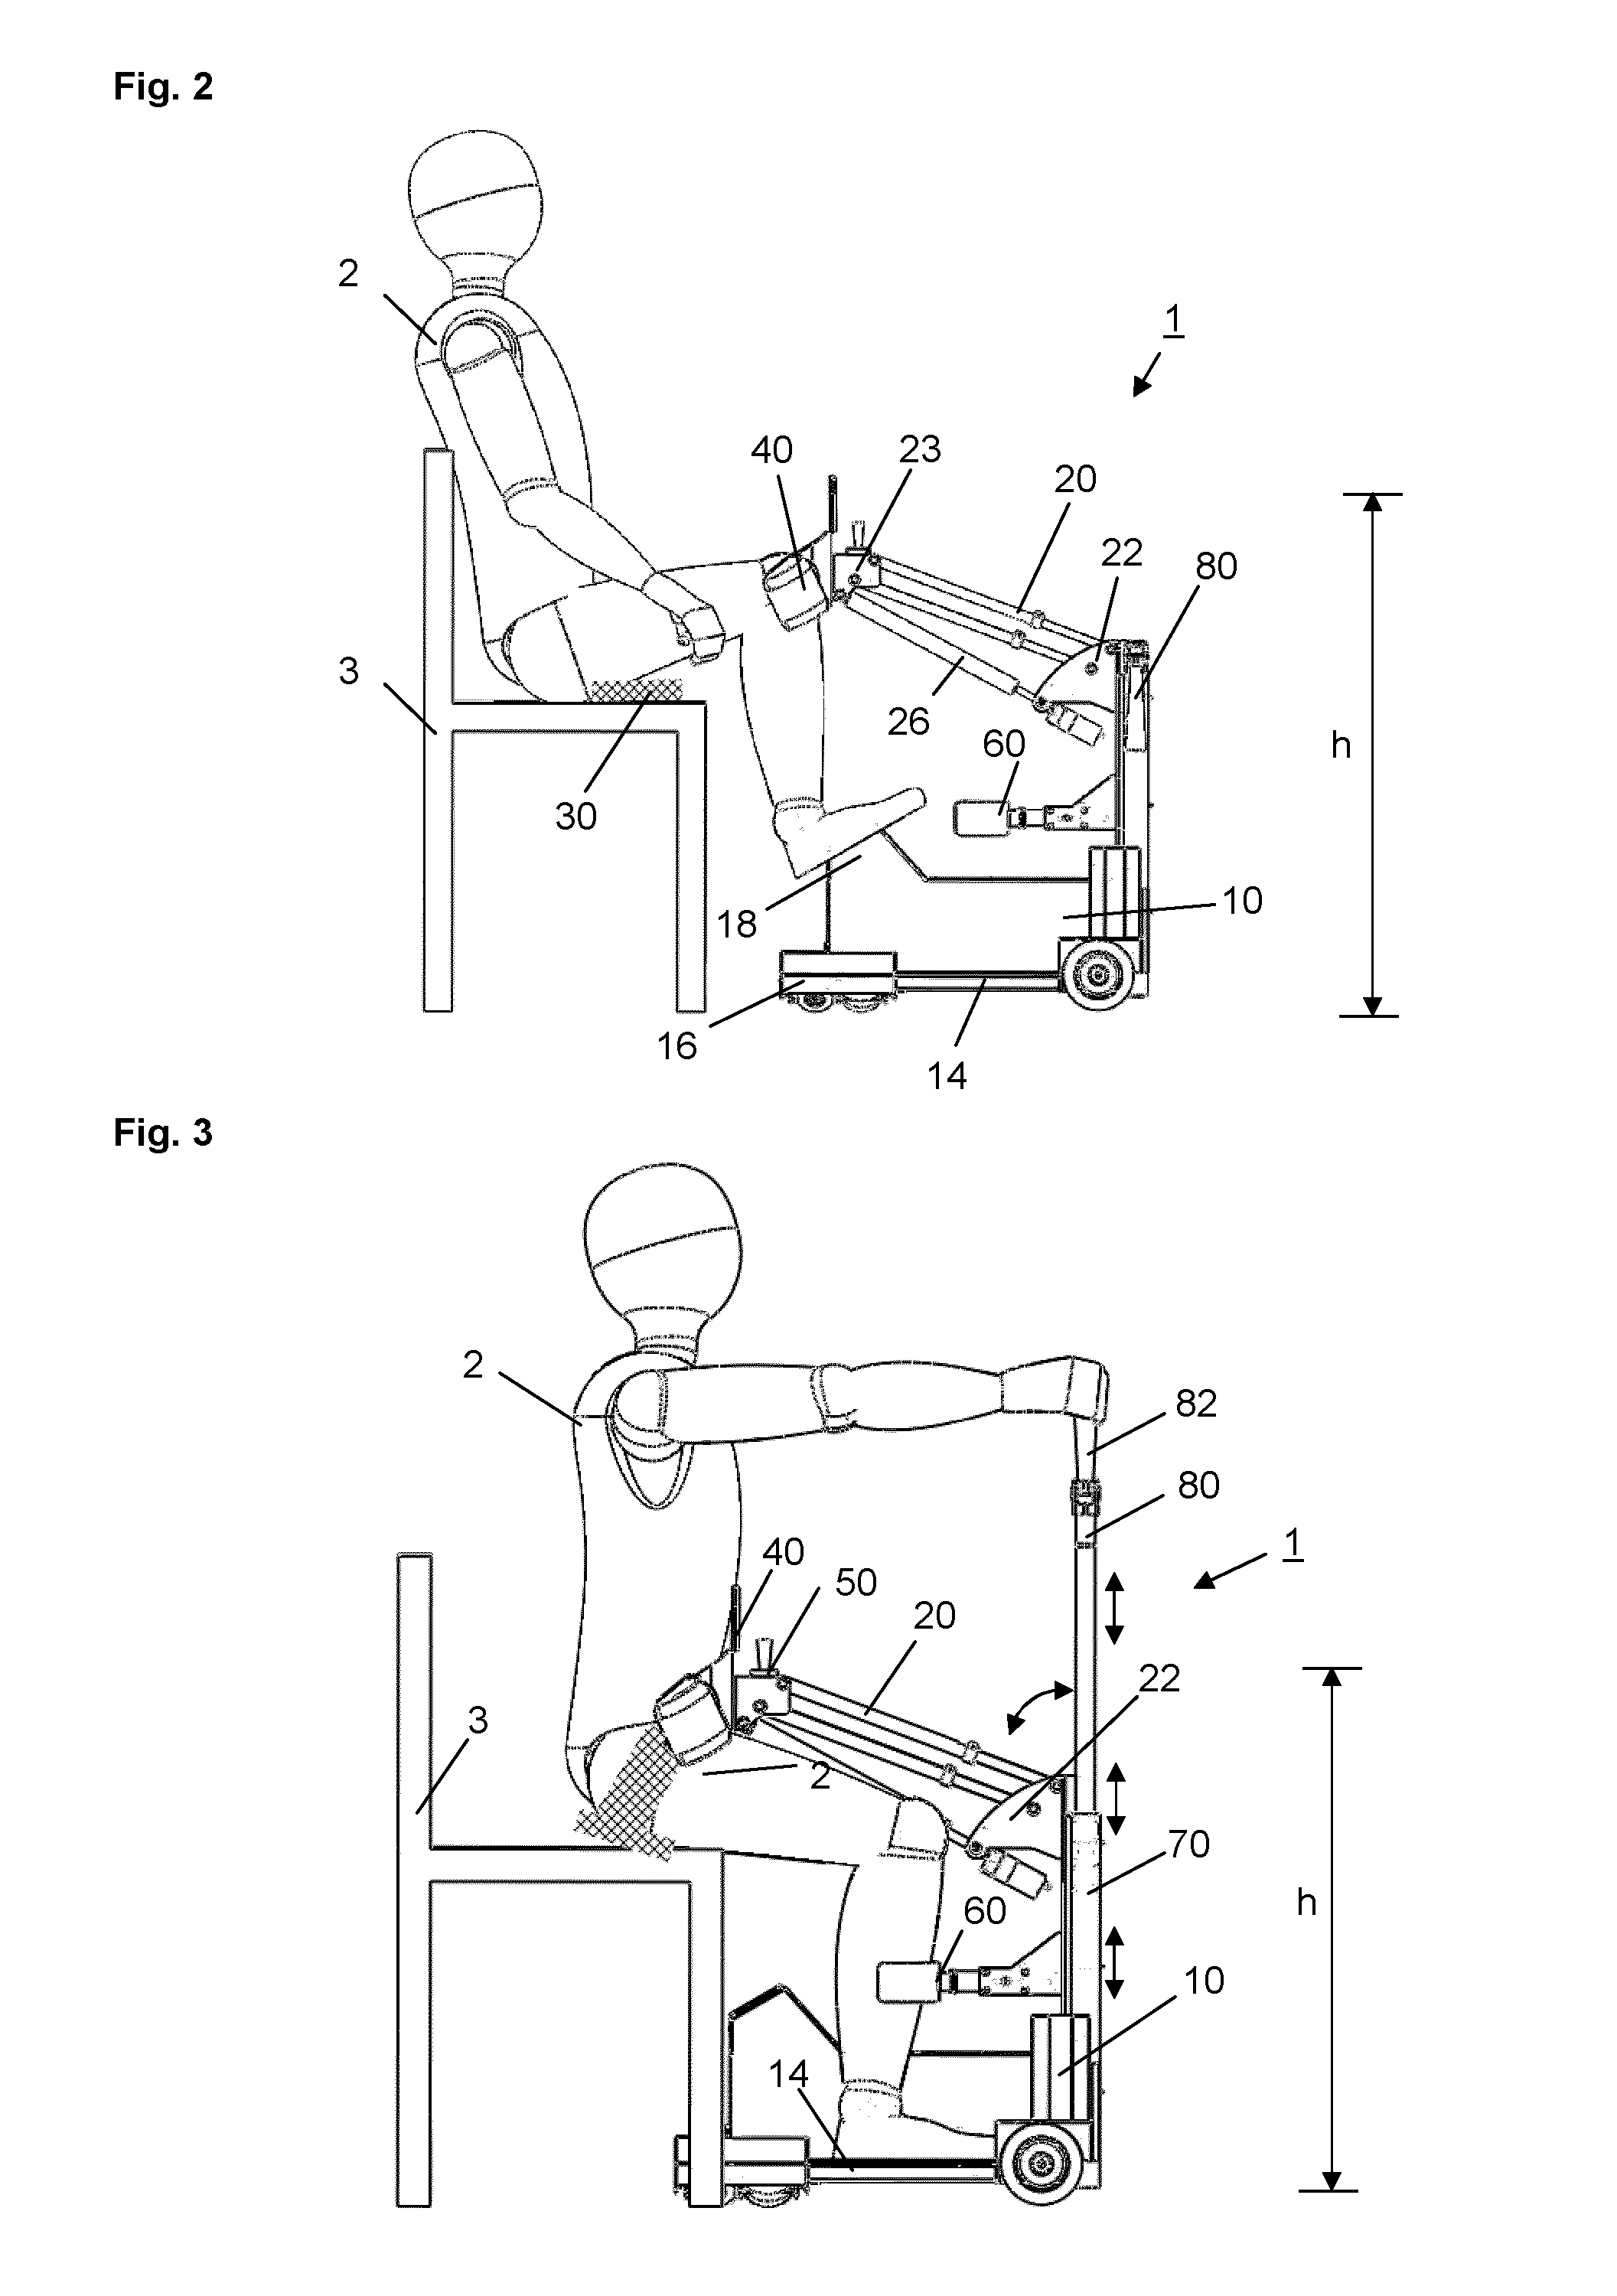 Mobility device for physically disabled people